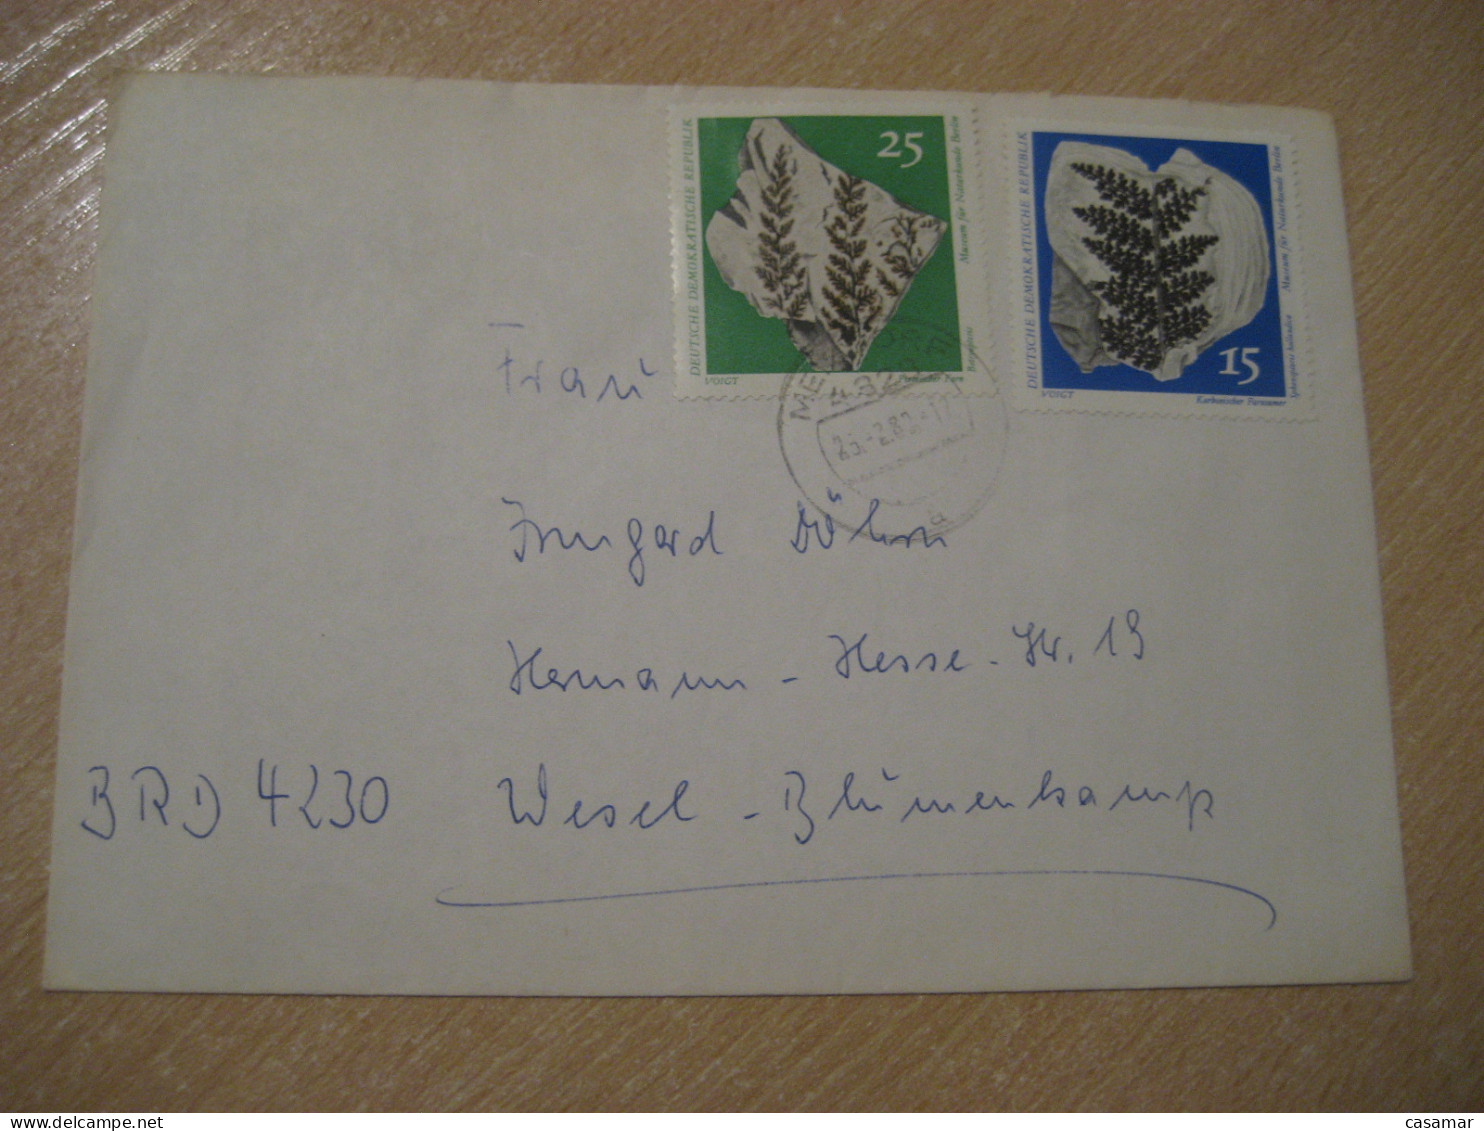 MEISDORF 198? To Wesel Cancel Cover DDR GERMANY Fossil Fossils Animals Fossiles Geology Geologie - Fossils